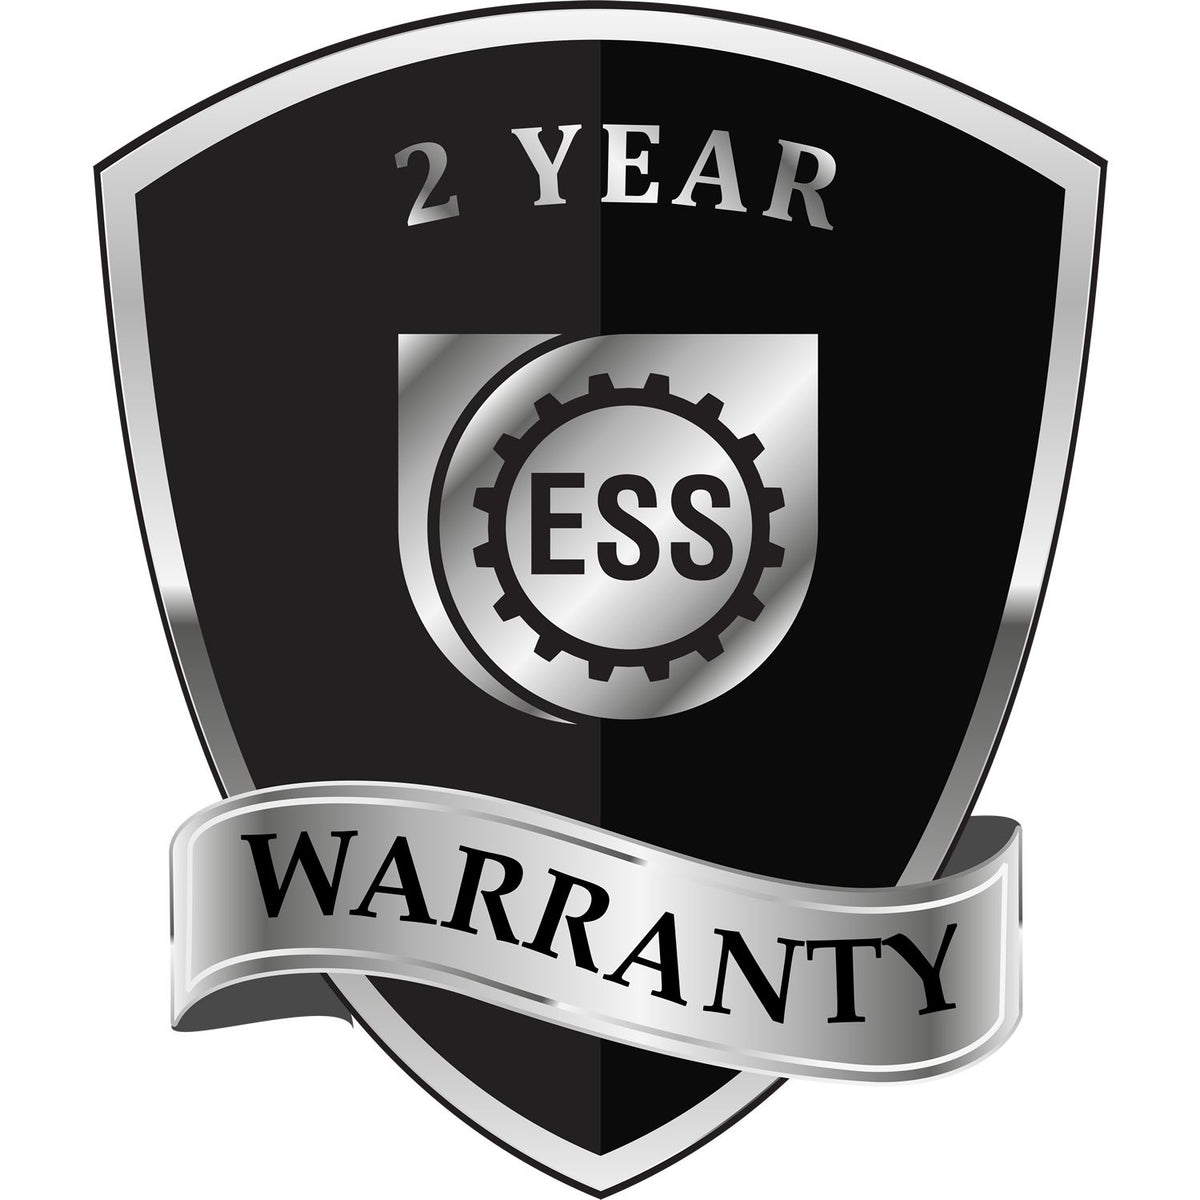 A badge or emblem showing a warranty icon for the Long Reach Kentucky Land Surveyor Seal